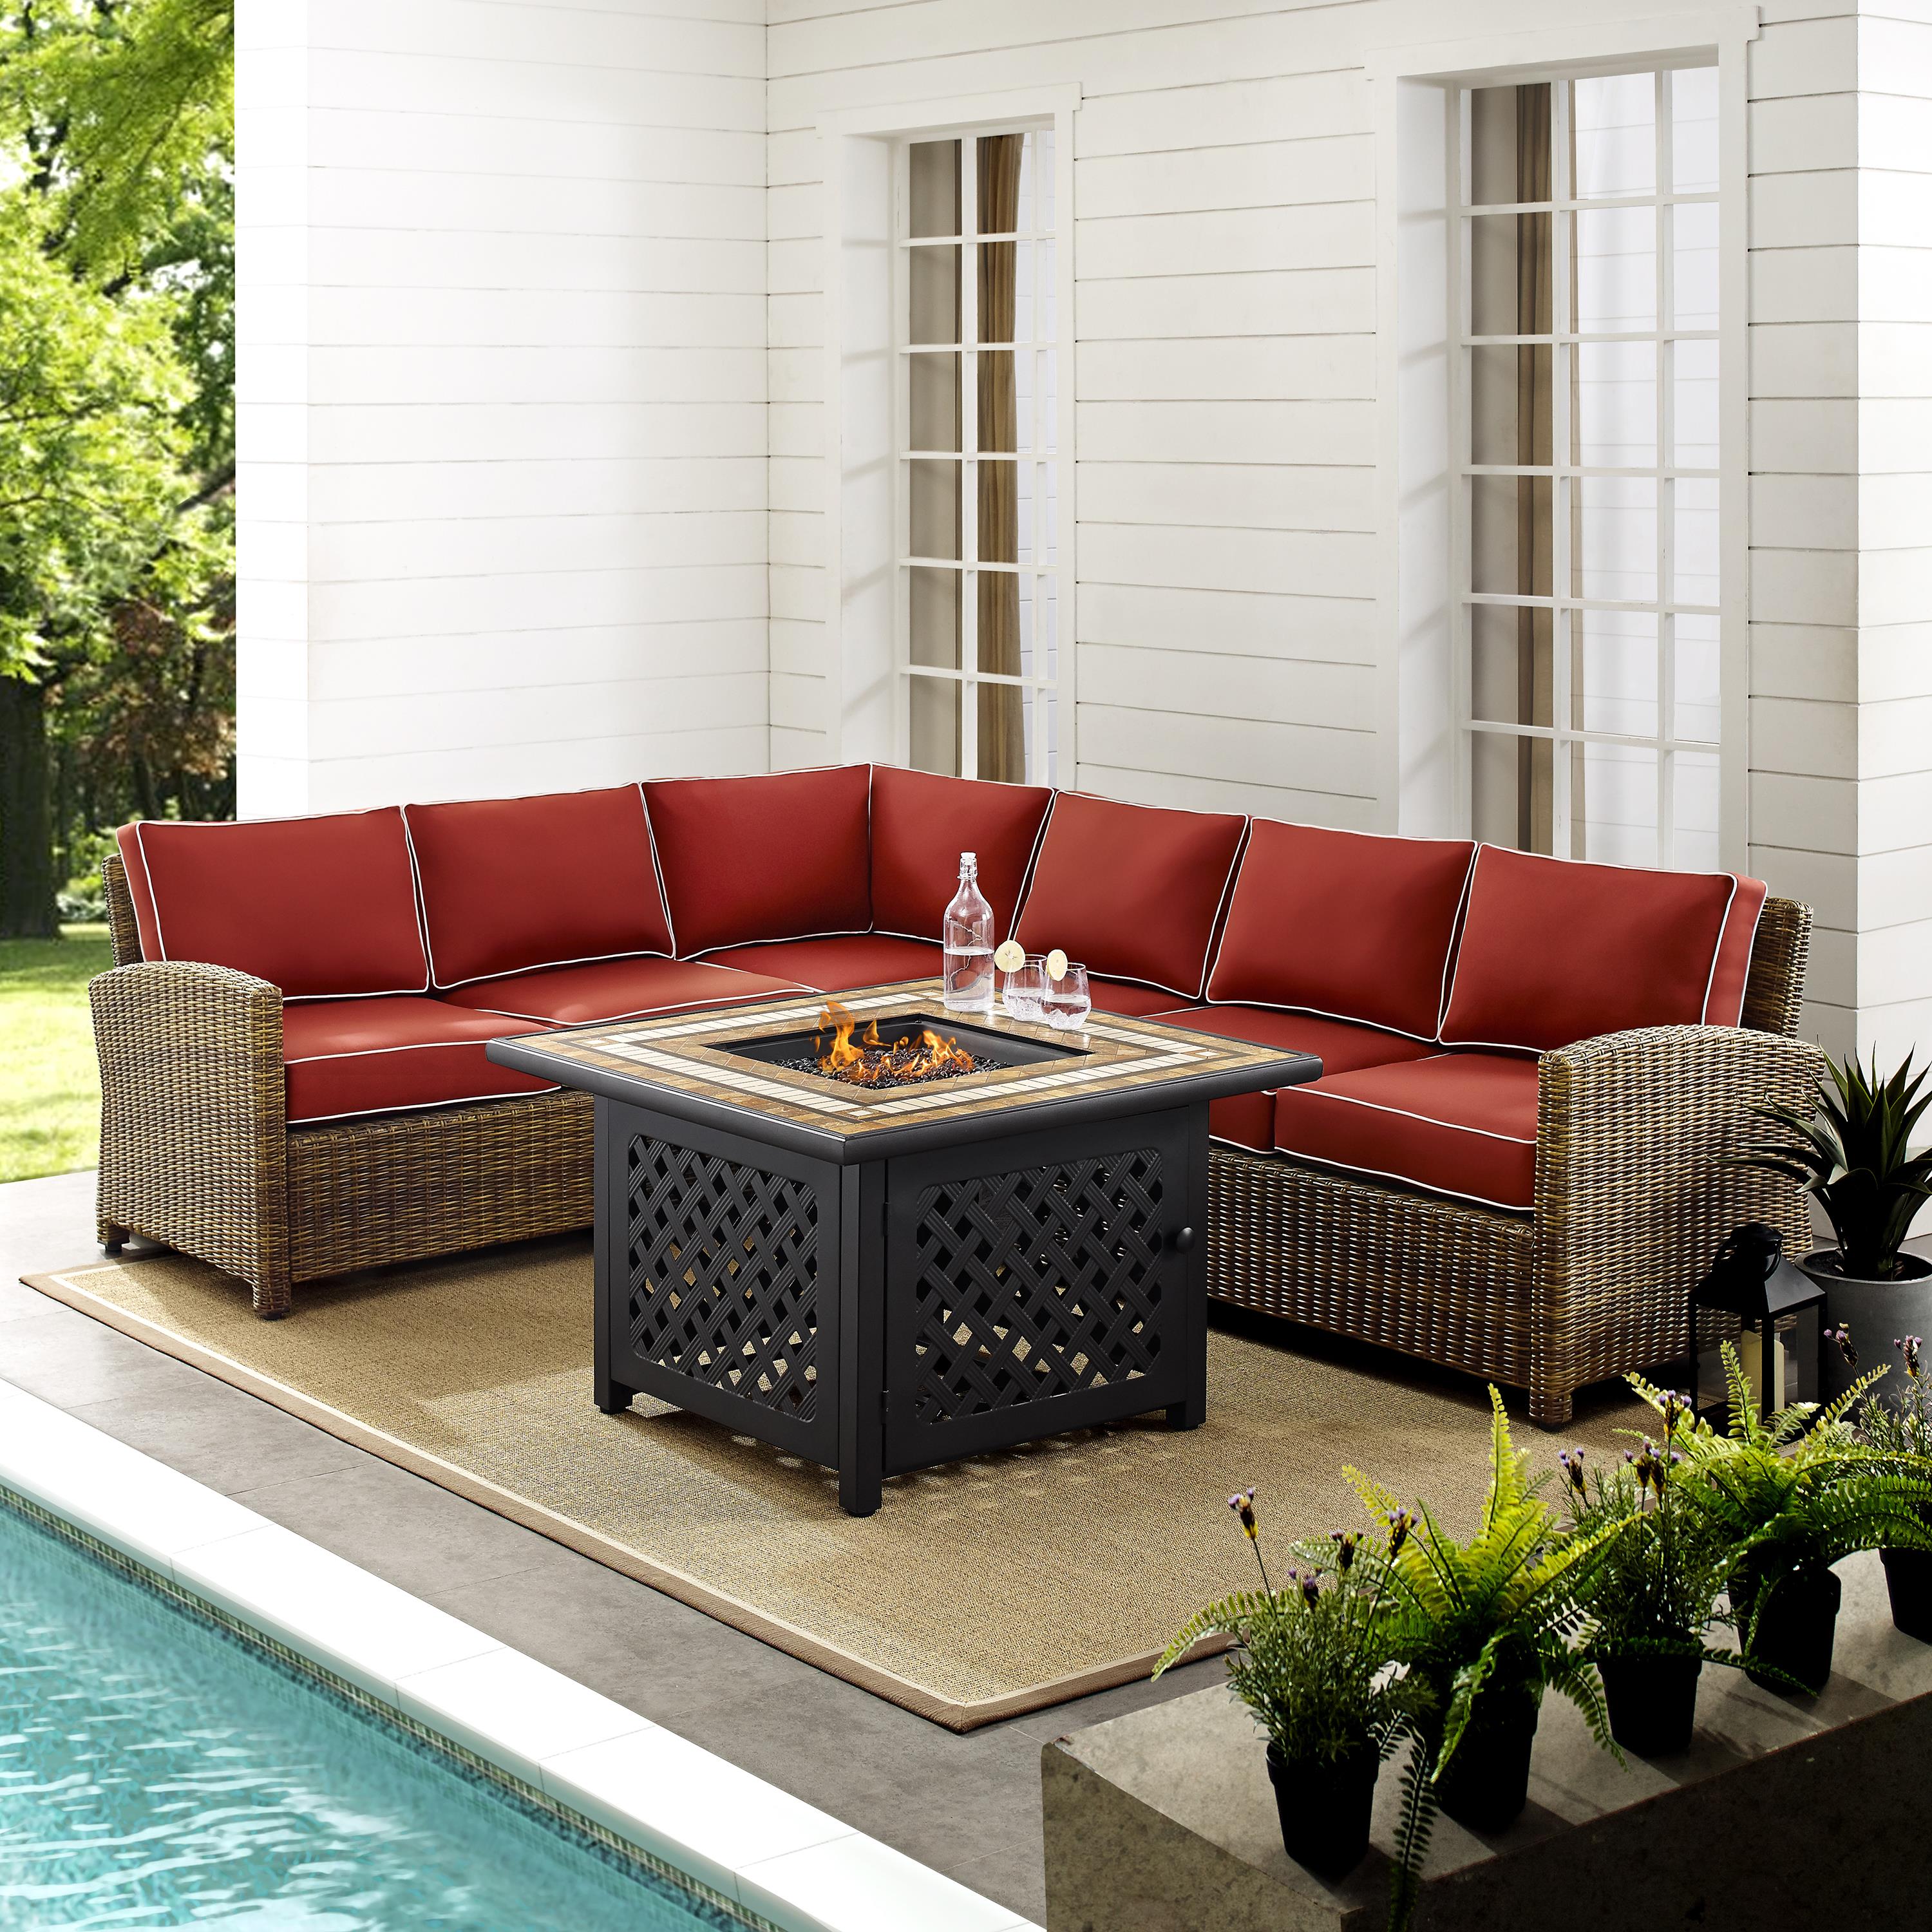 Crosley Furniture Bradenton 5 Piece Fabric Fire Pit Sectional Set in Brown/Red - image 5 of 9